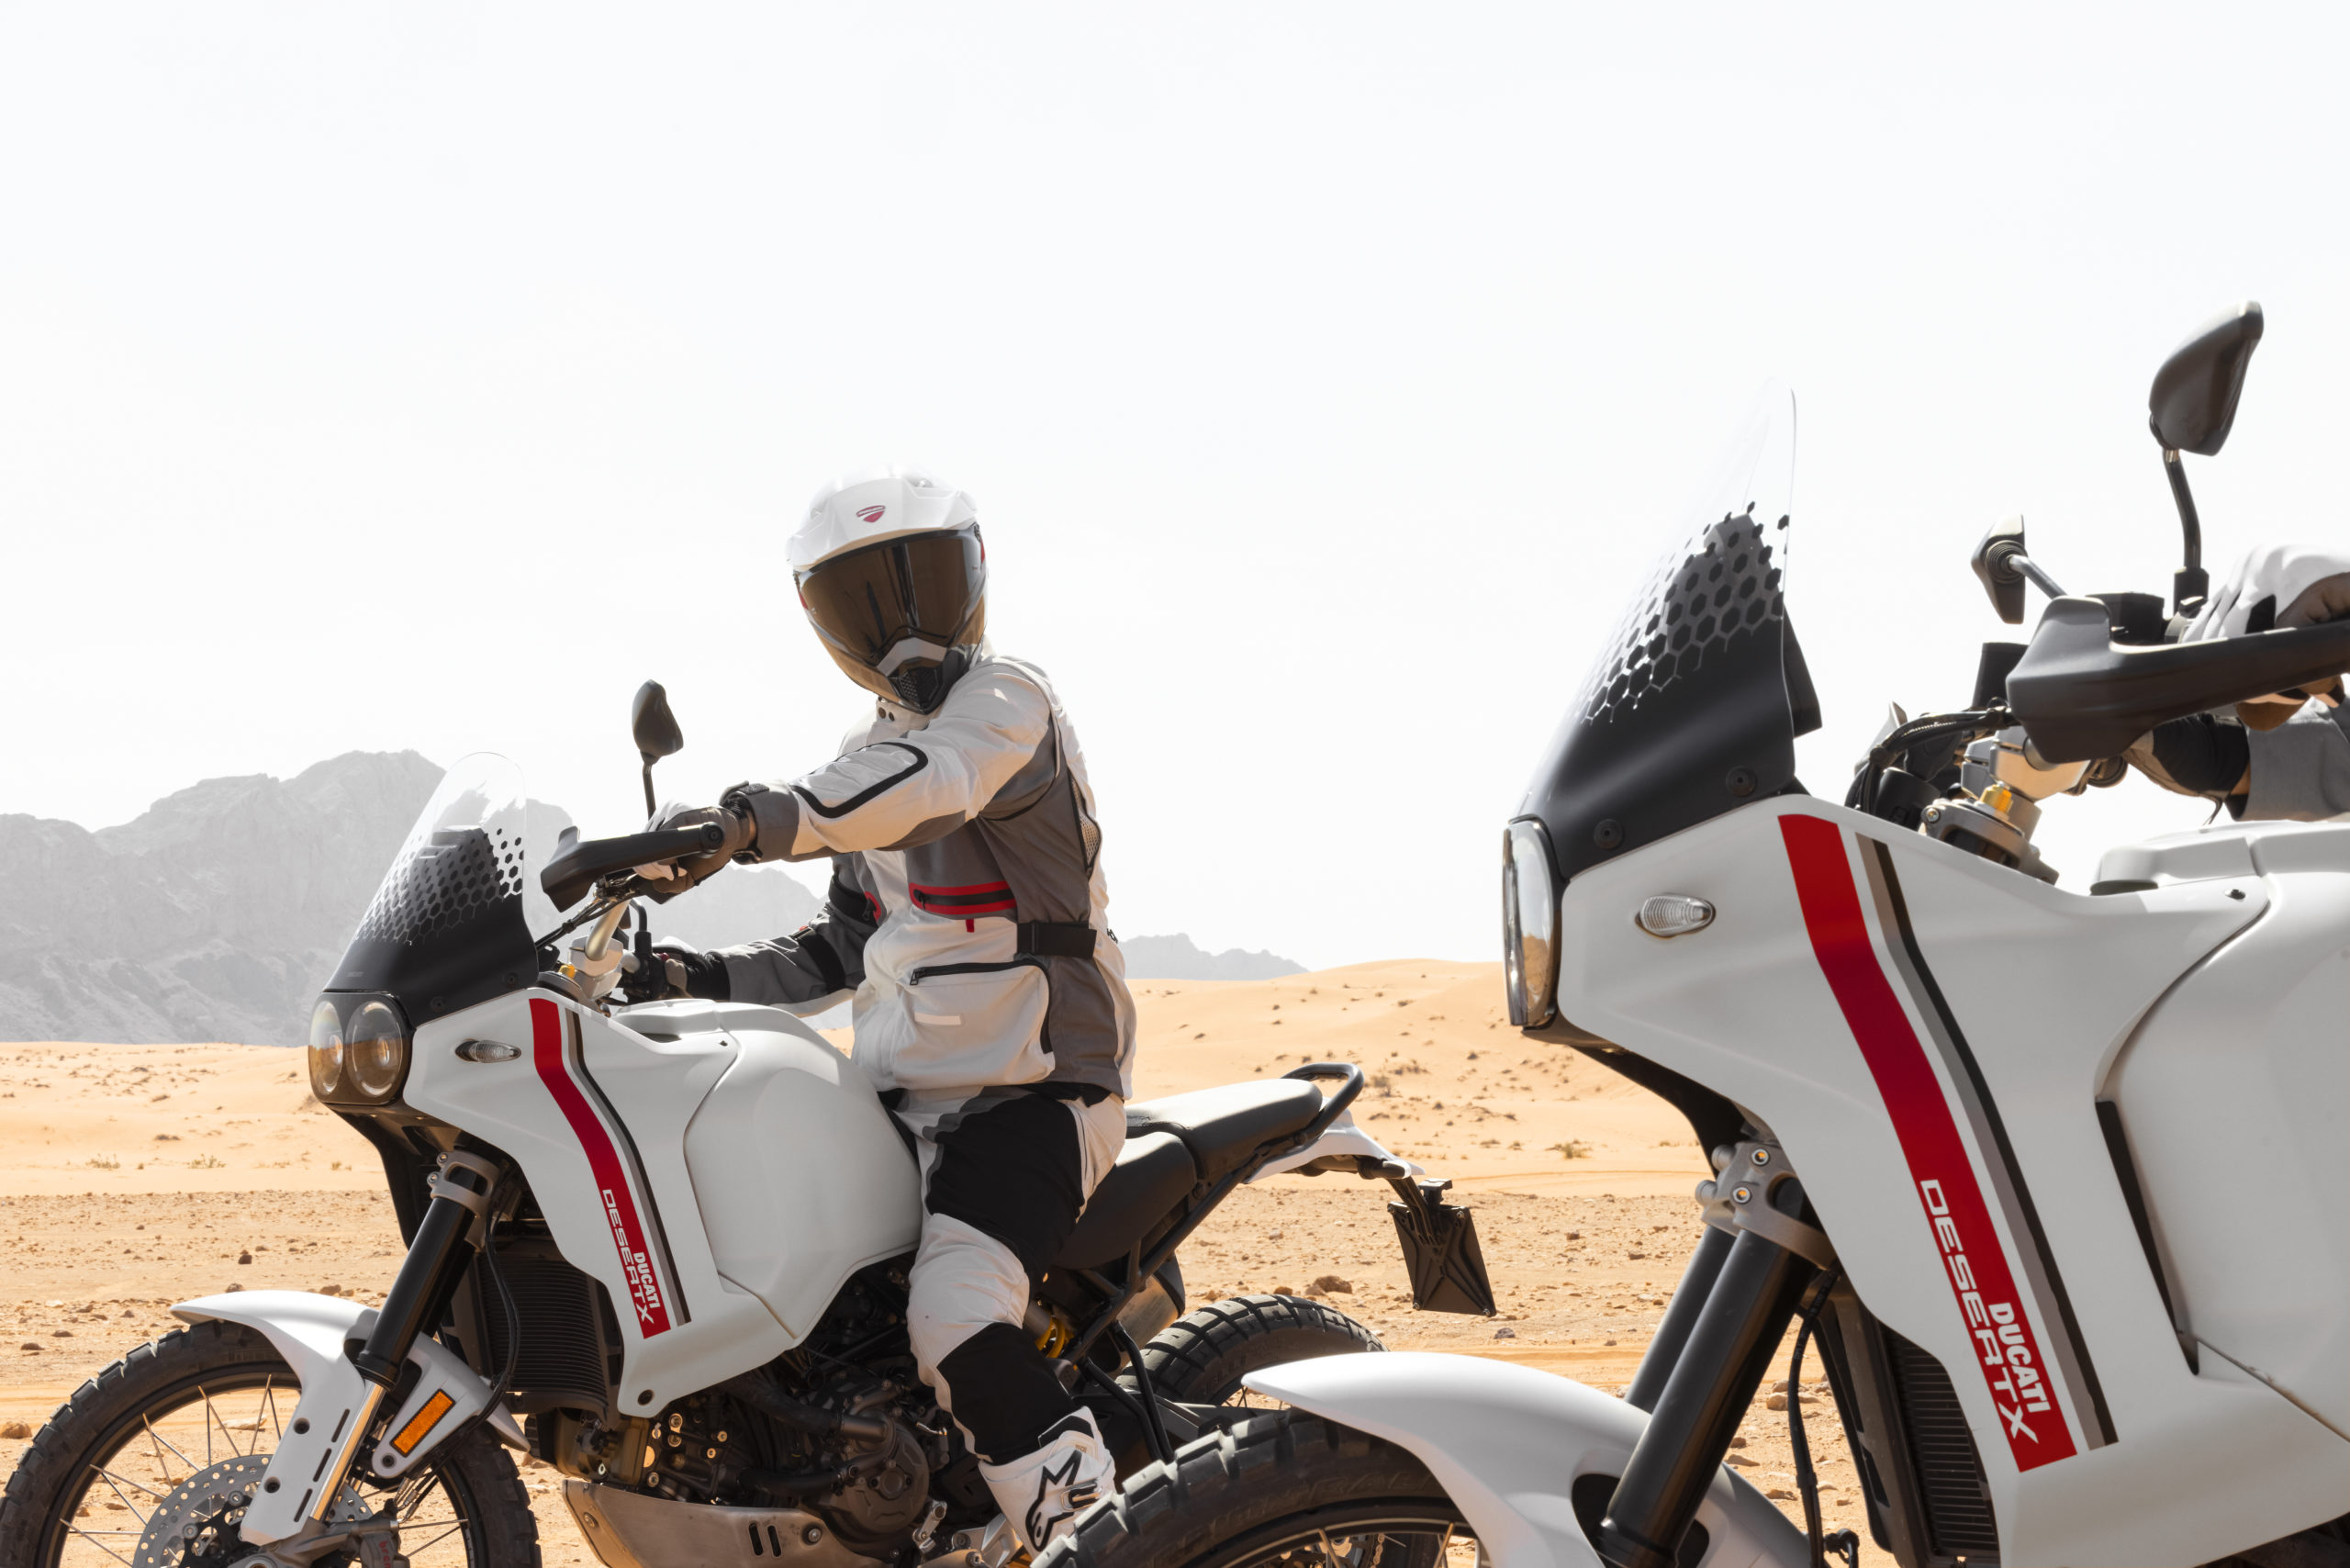 A view of the Ducati DesertX being ridden in the desert